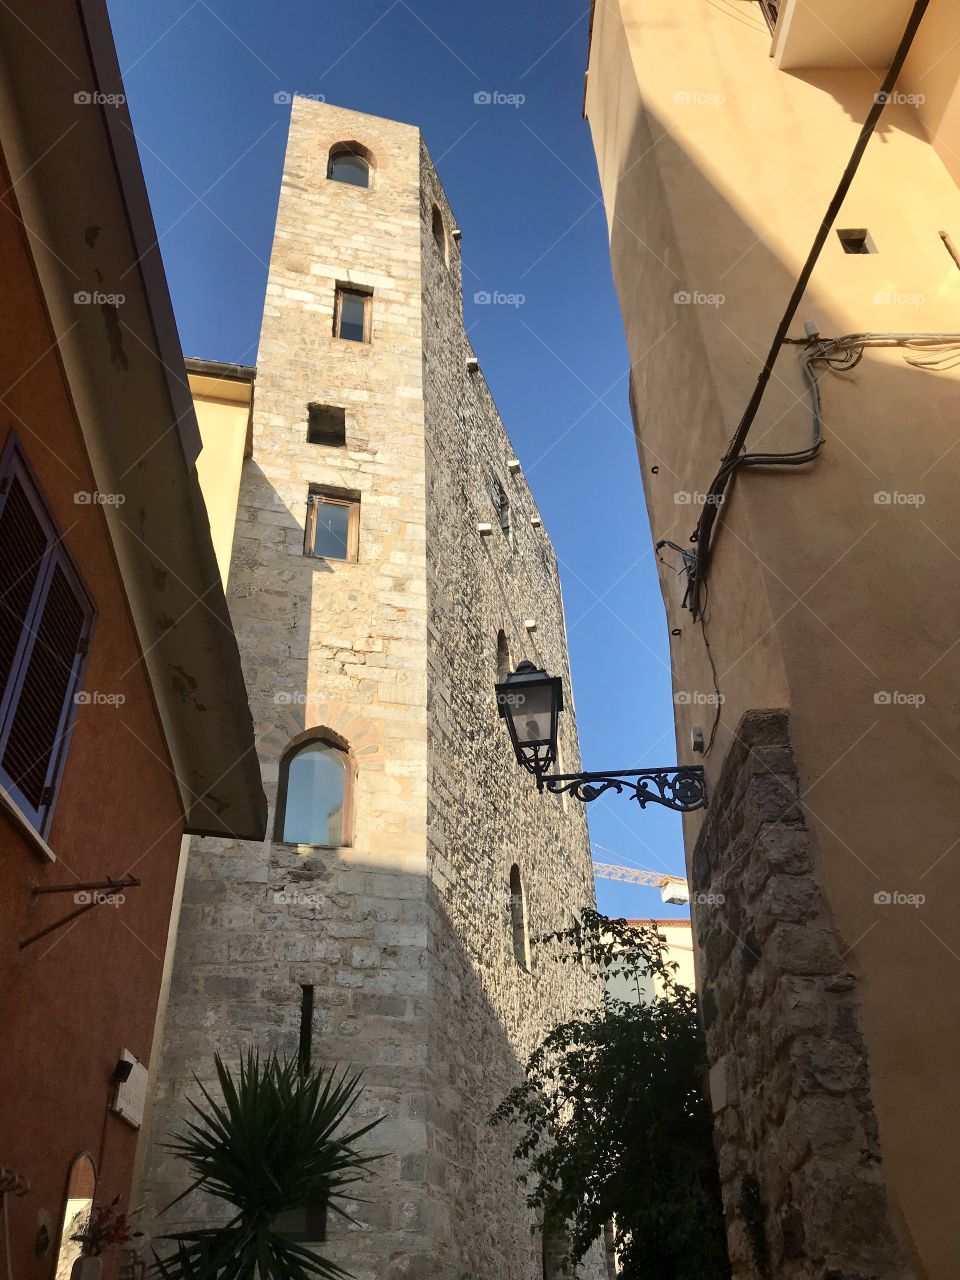 Stunning old tower in Terracina, Italy